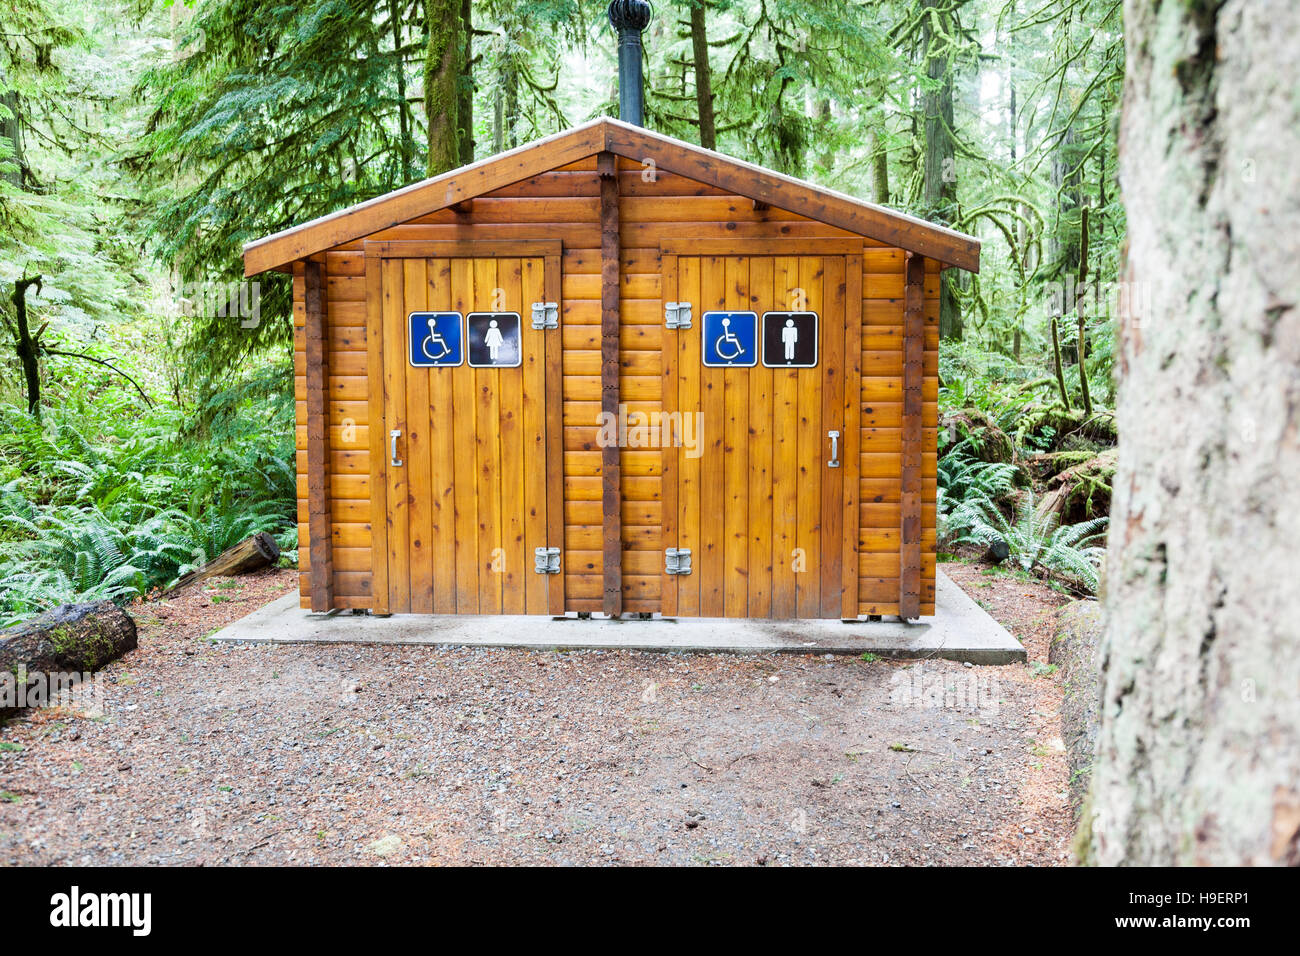 A drop box or outdoor toilet in Cathedral Grove, MacMillan Provincial Park, Vancouver Island, British Columbia, Canada Stock Photo